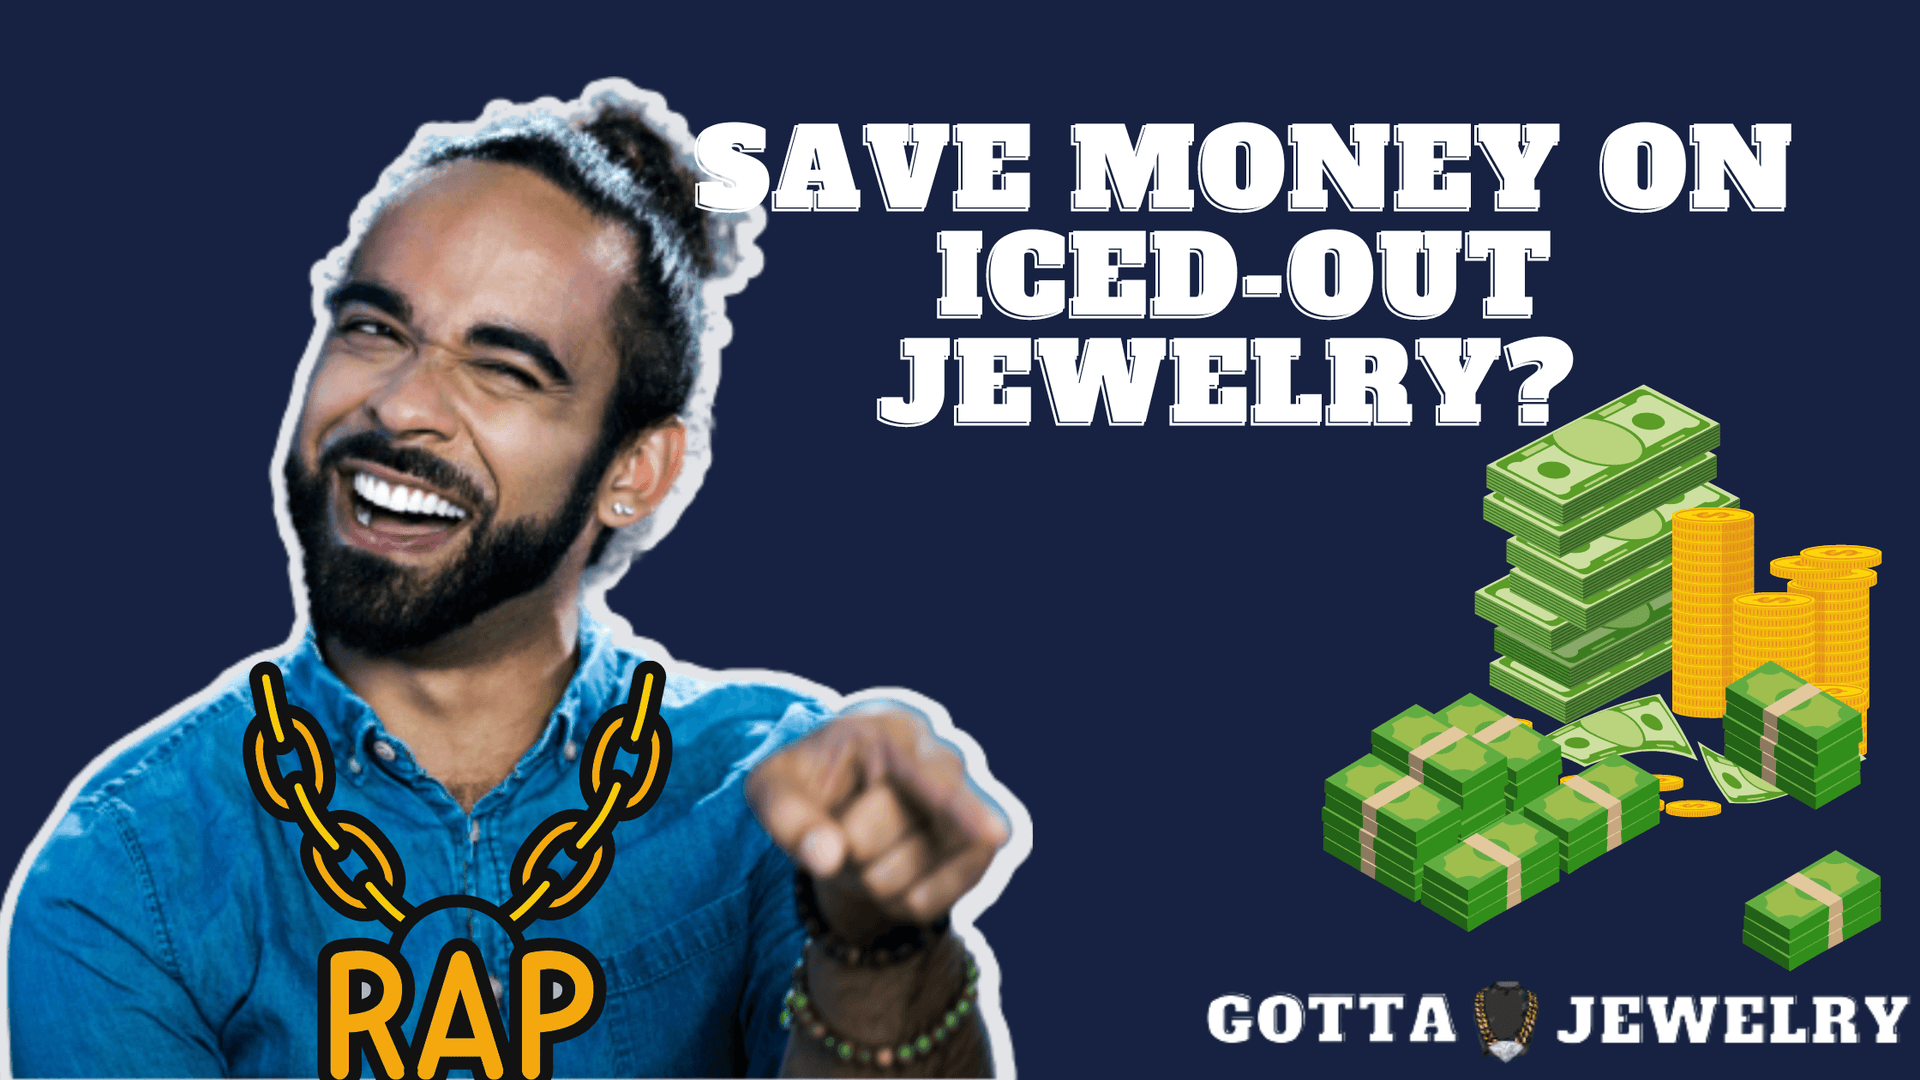 How to save money on iced out jewelry without sacrificing quality? | GottaIce